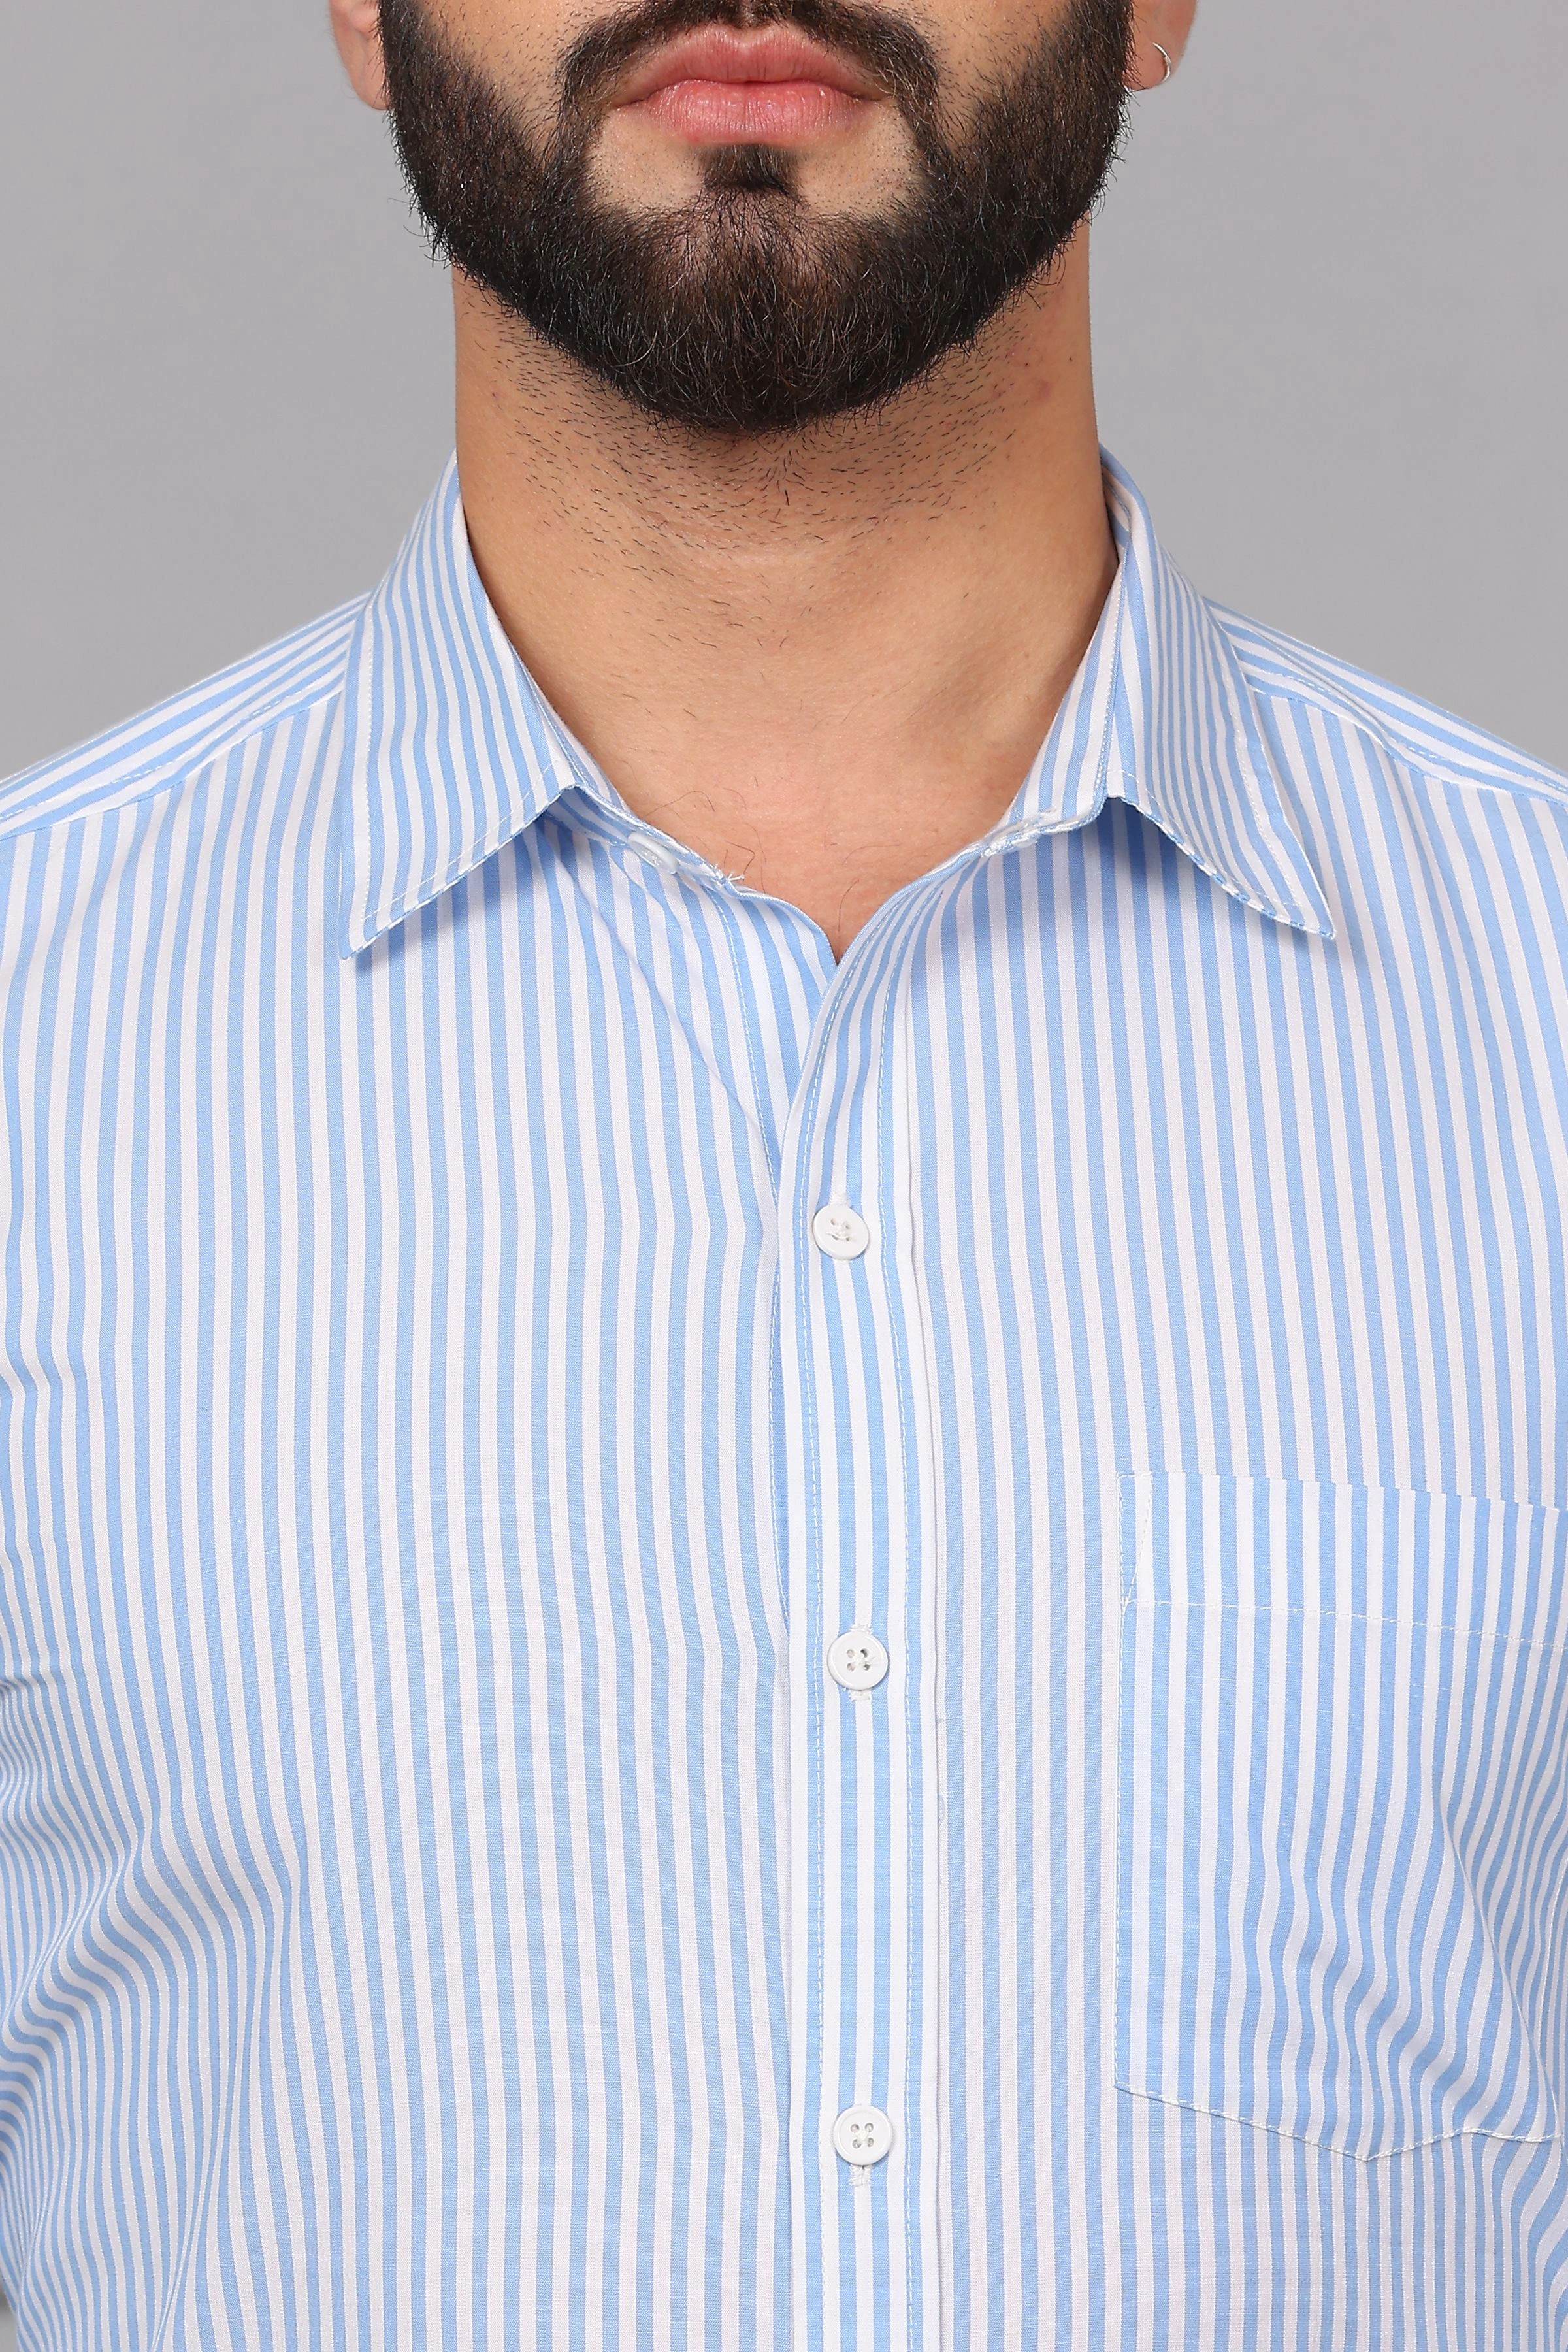 Pinstripe Cotton Shirt Blue And White-S-5